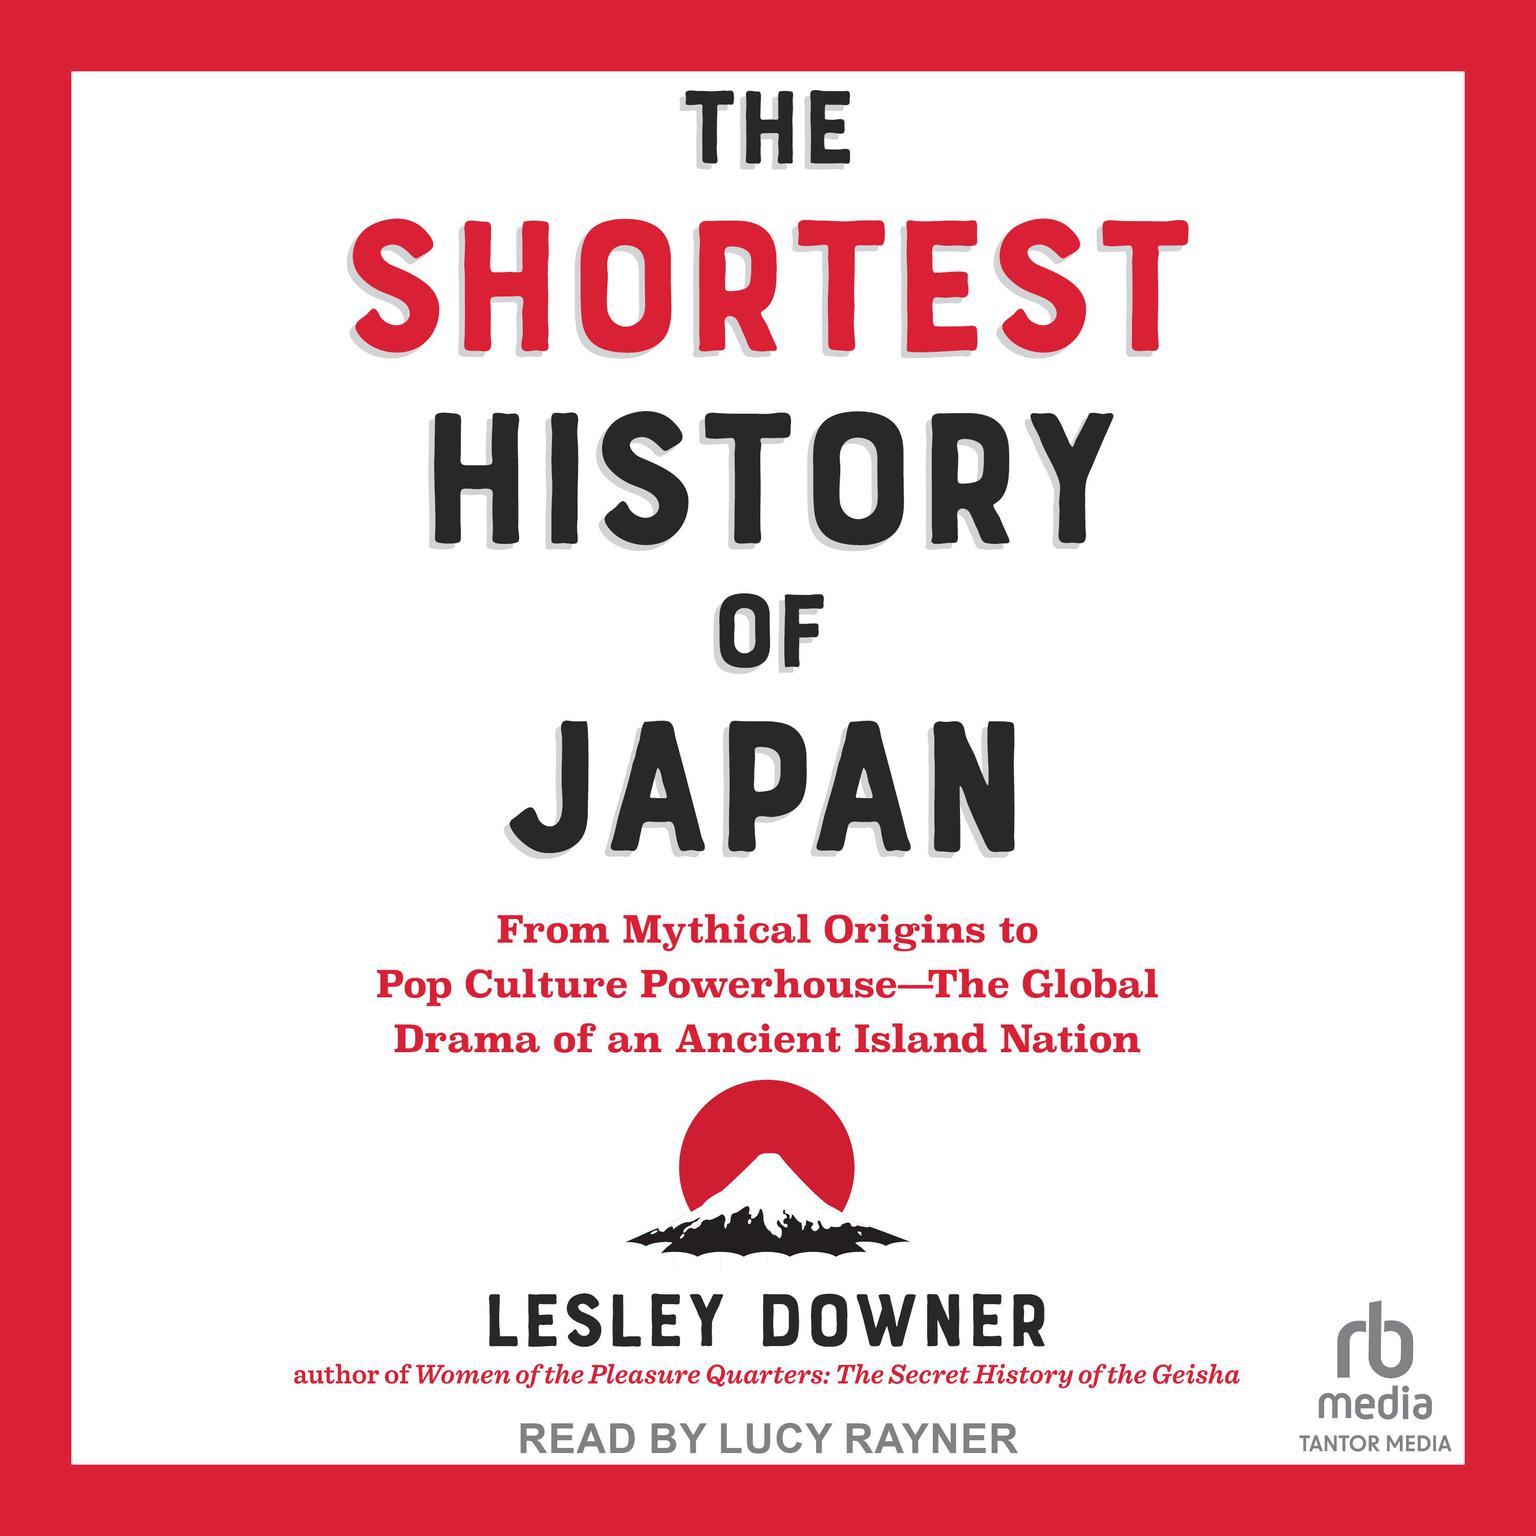 The Shortest History of Japan: From Mythical Origins to Pop Culture Powerhouse―The Global Drama of an Ancient Island Nation Audiobook, by Lesley Downer